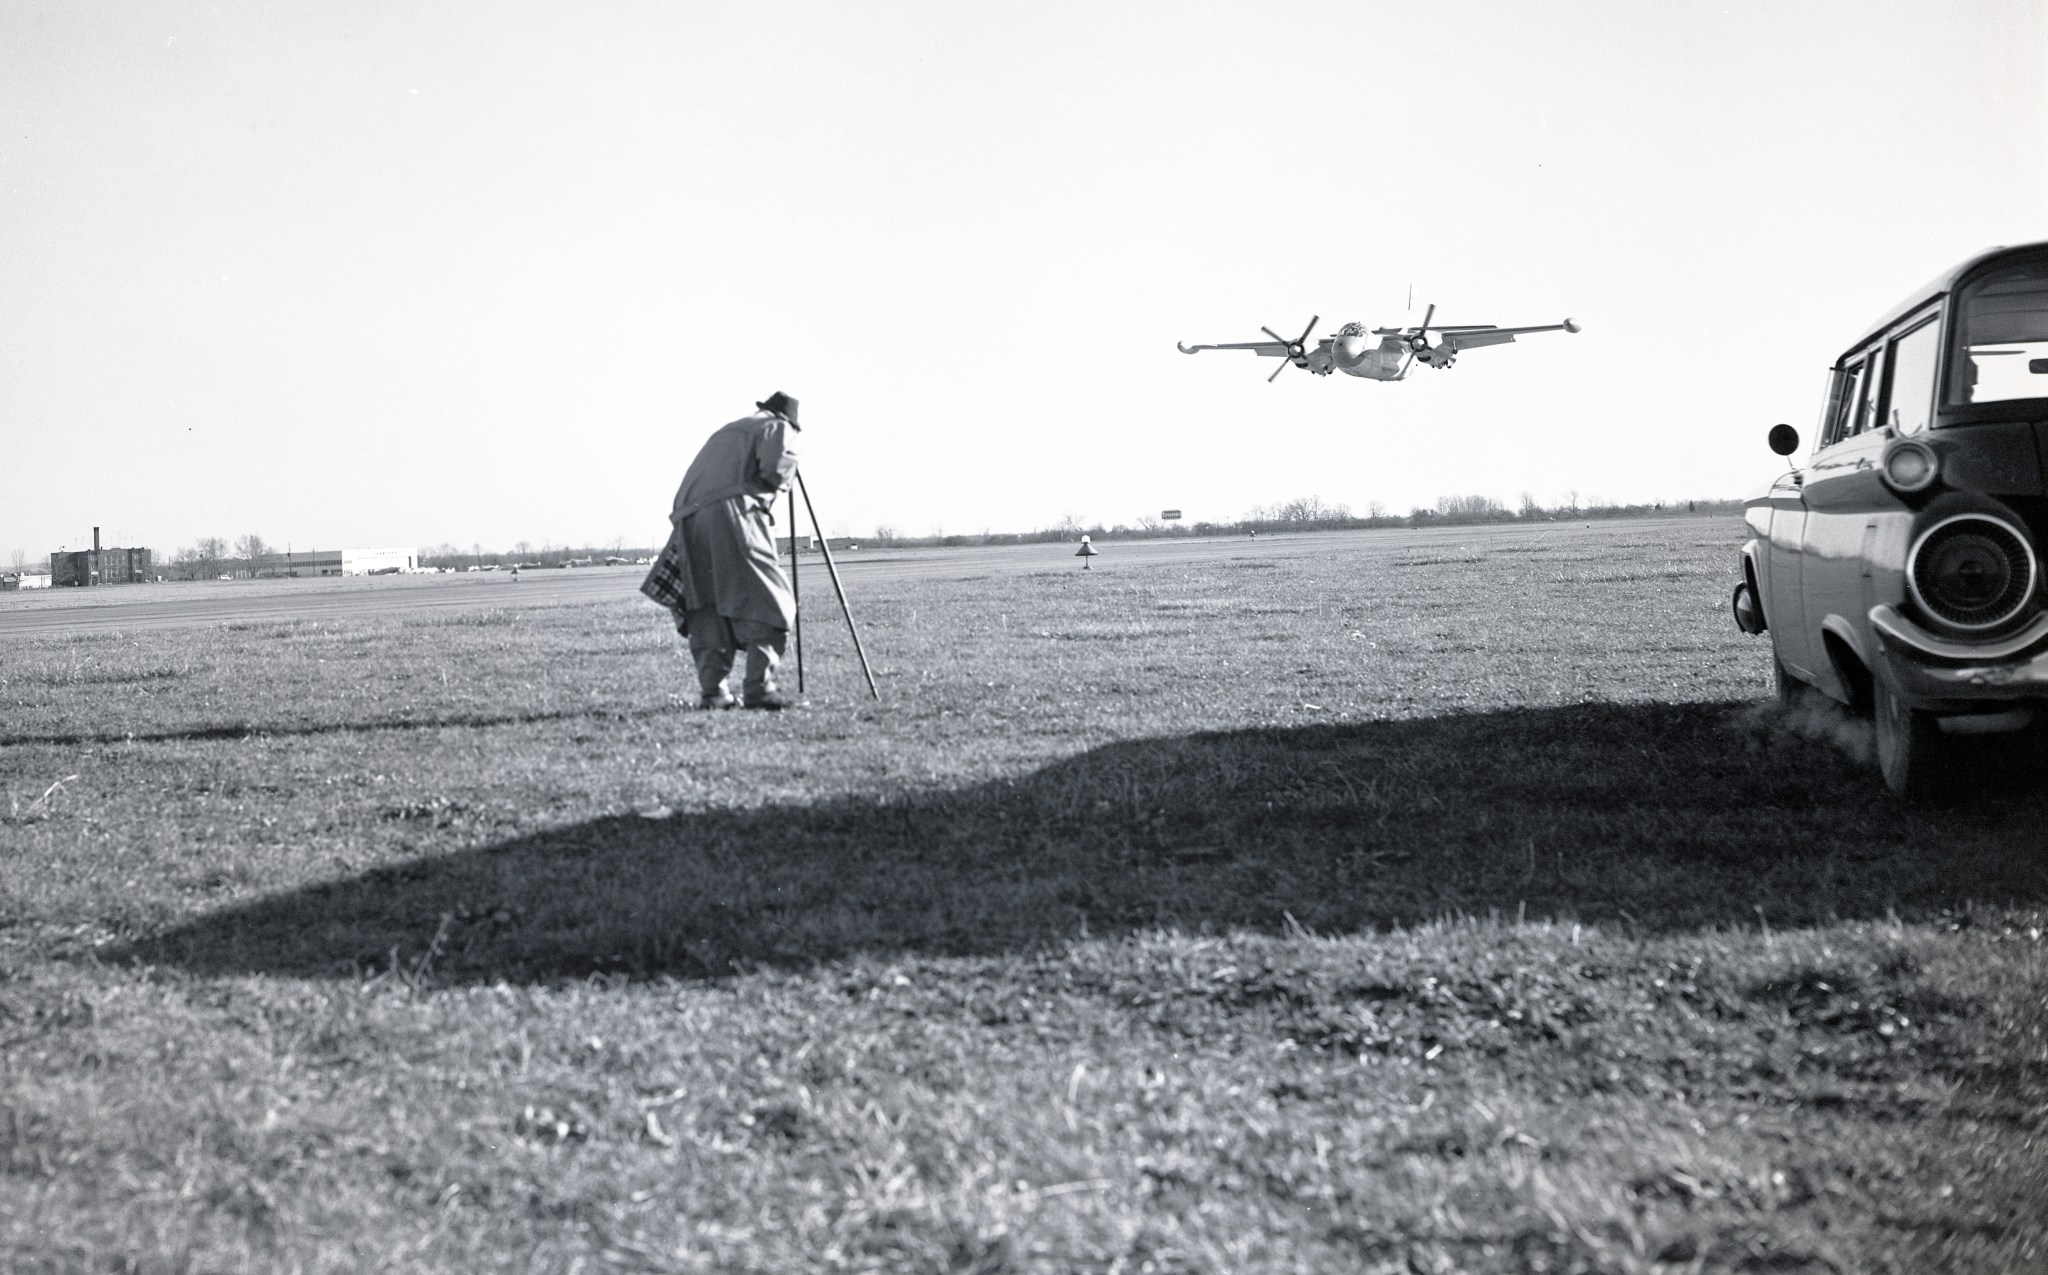 Photographer filming low flying aircraft.